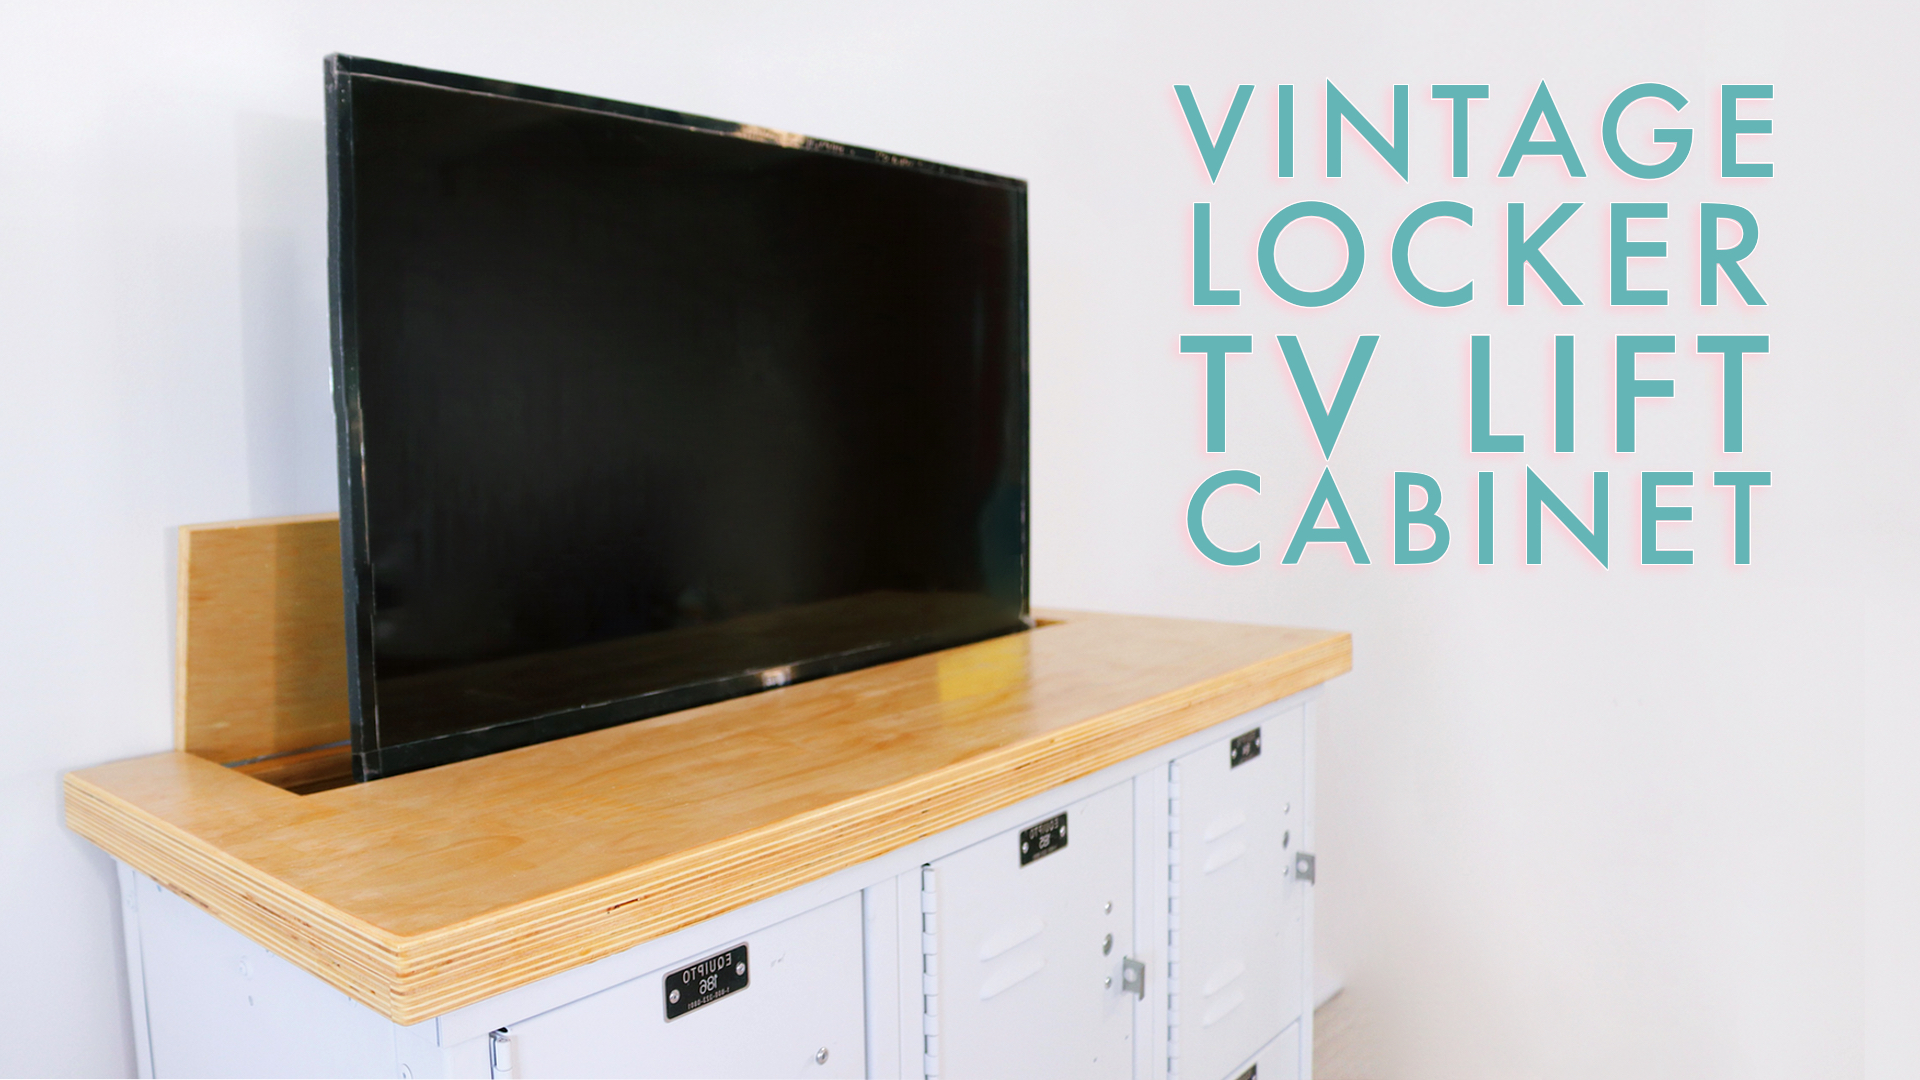  Vintage Lockers Turned into a TV Lift Cabinet / Media Console by: Mike Montgomery 